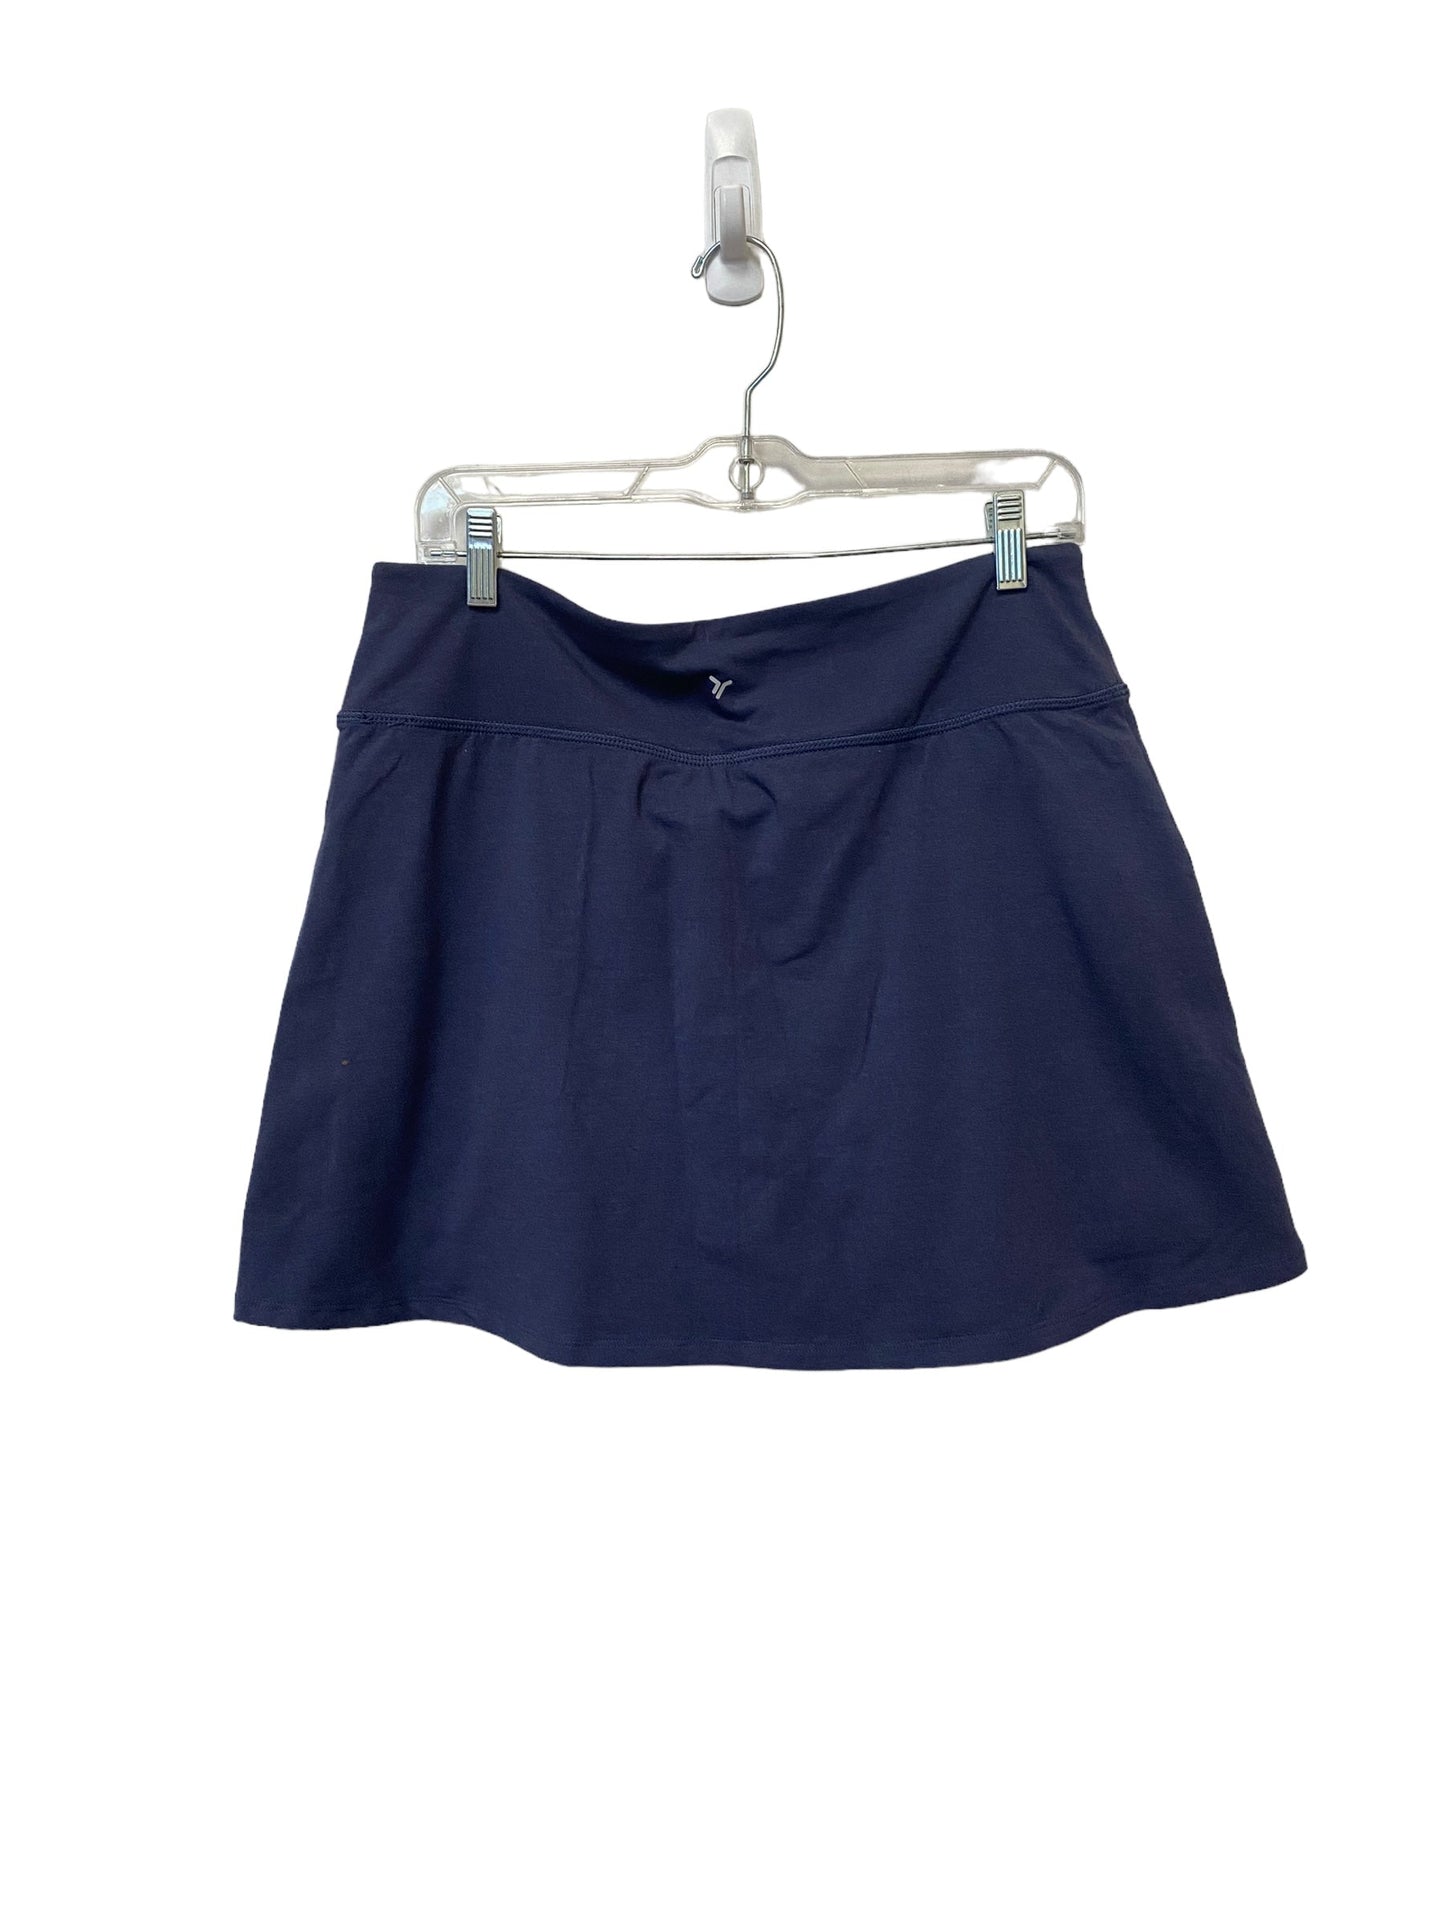 Athletic Skirt By Old Navy  Size: L